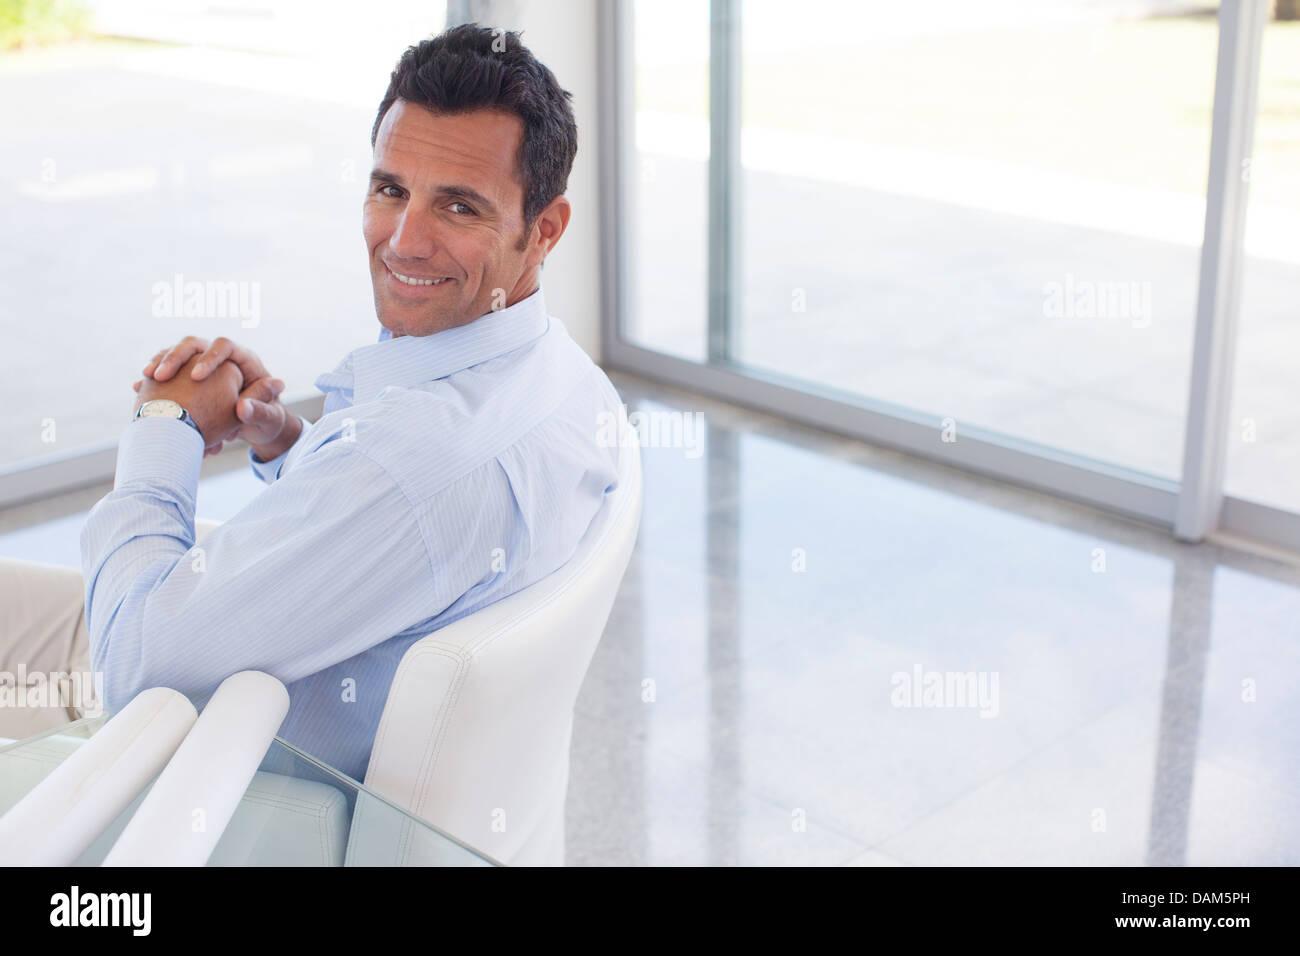 Businessman smiling in office chair Banque D'Images